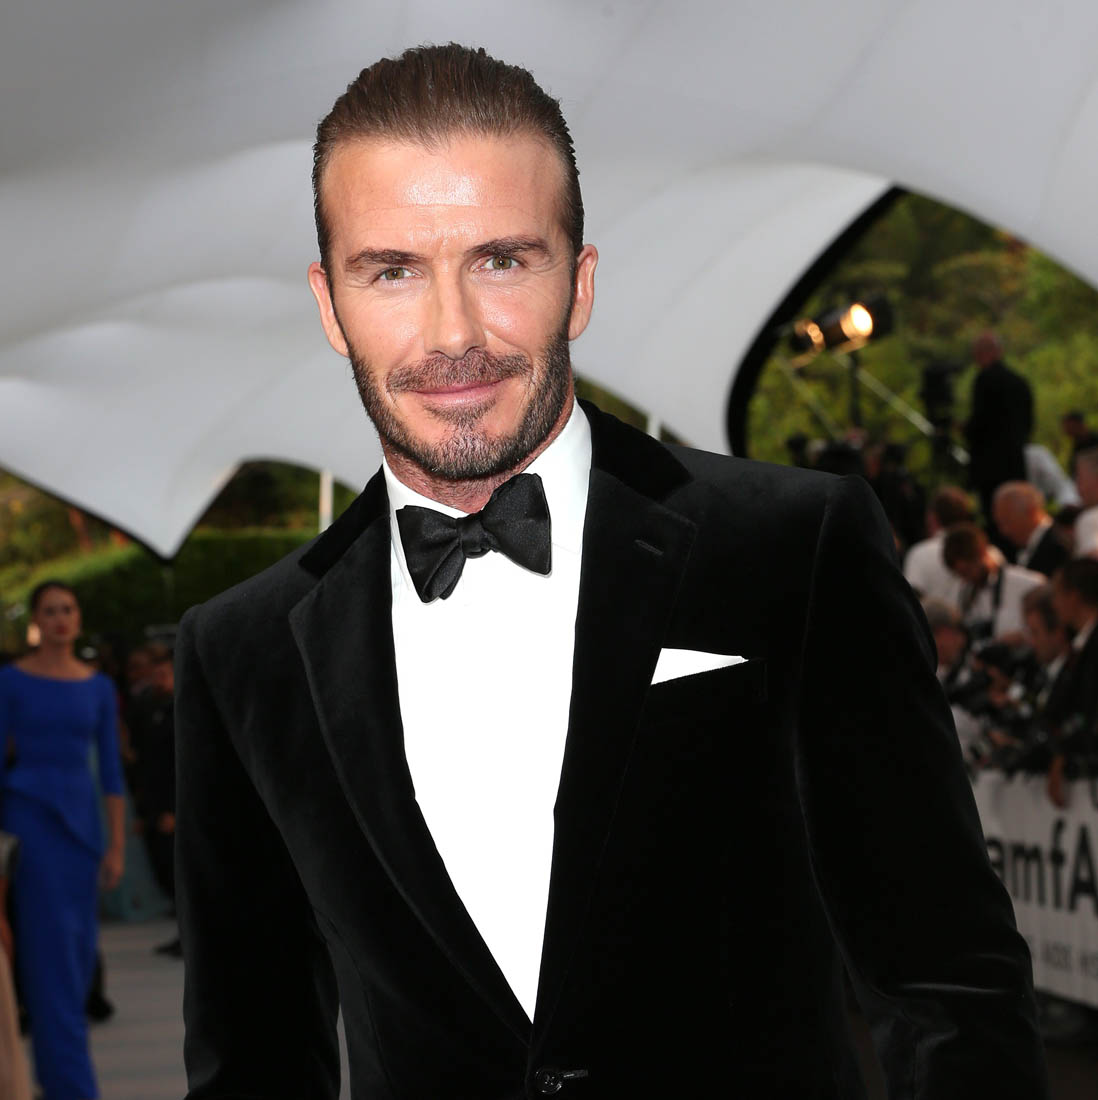 David Beckham at Cannes amfAR gala for the first time